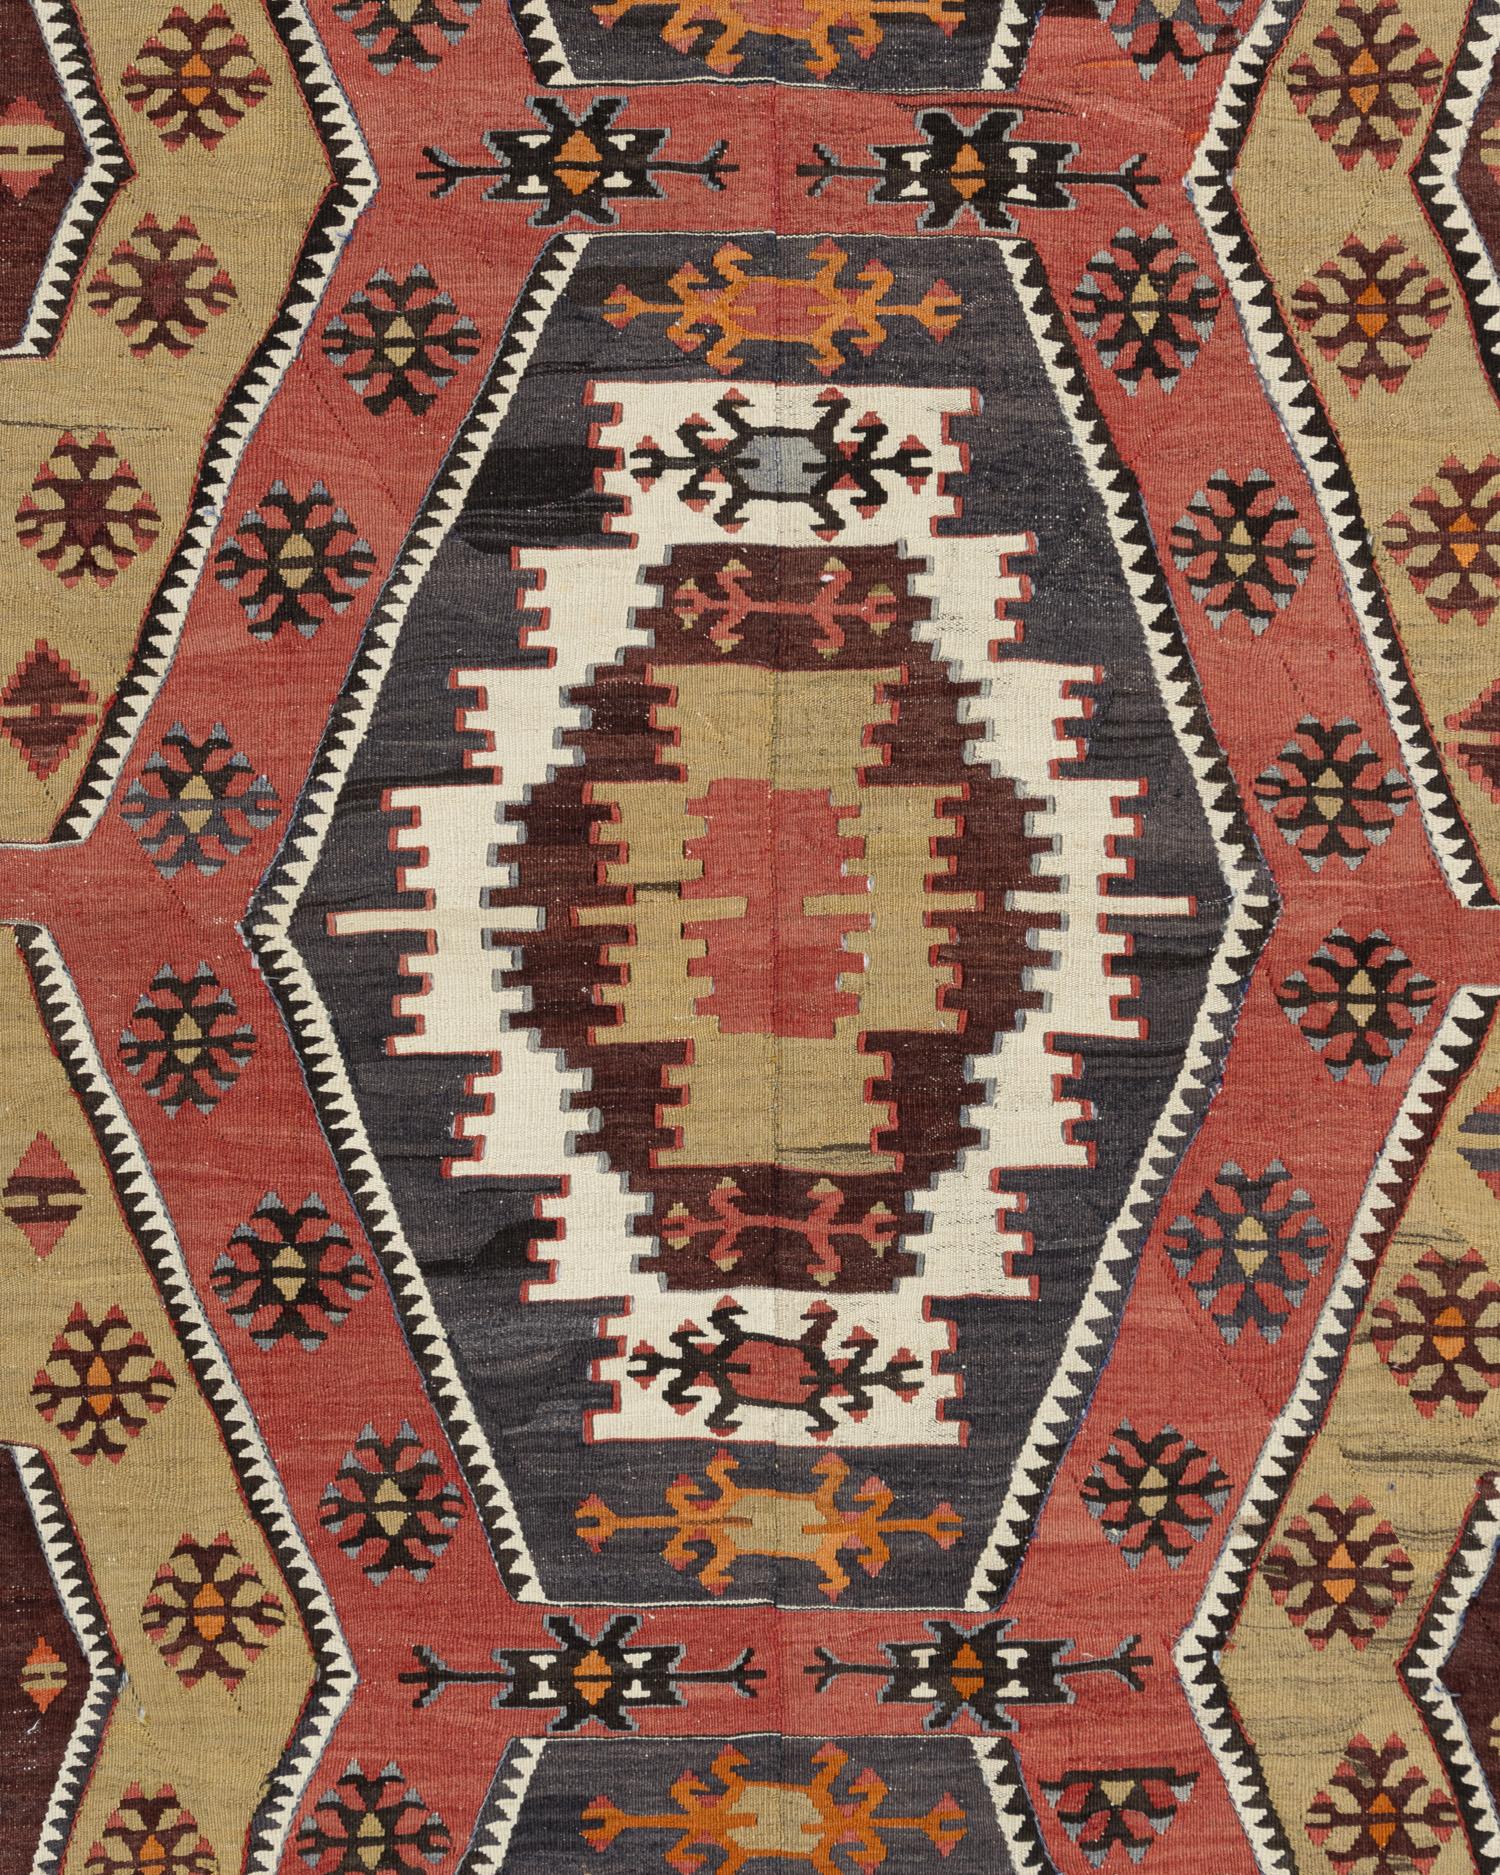 Vintage Turkish Kilim rug 4'11 X 11'9. This vintage Turkish flat weave Kilim was hand-woven in the 1940's. The simplicity and boldness of this piece can also give a contemporary feel and is able to look at home in both a modern and traditional